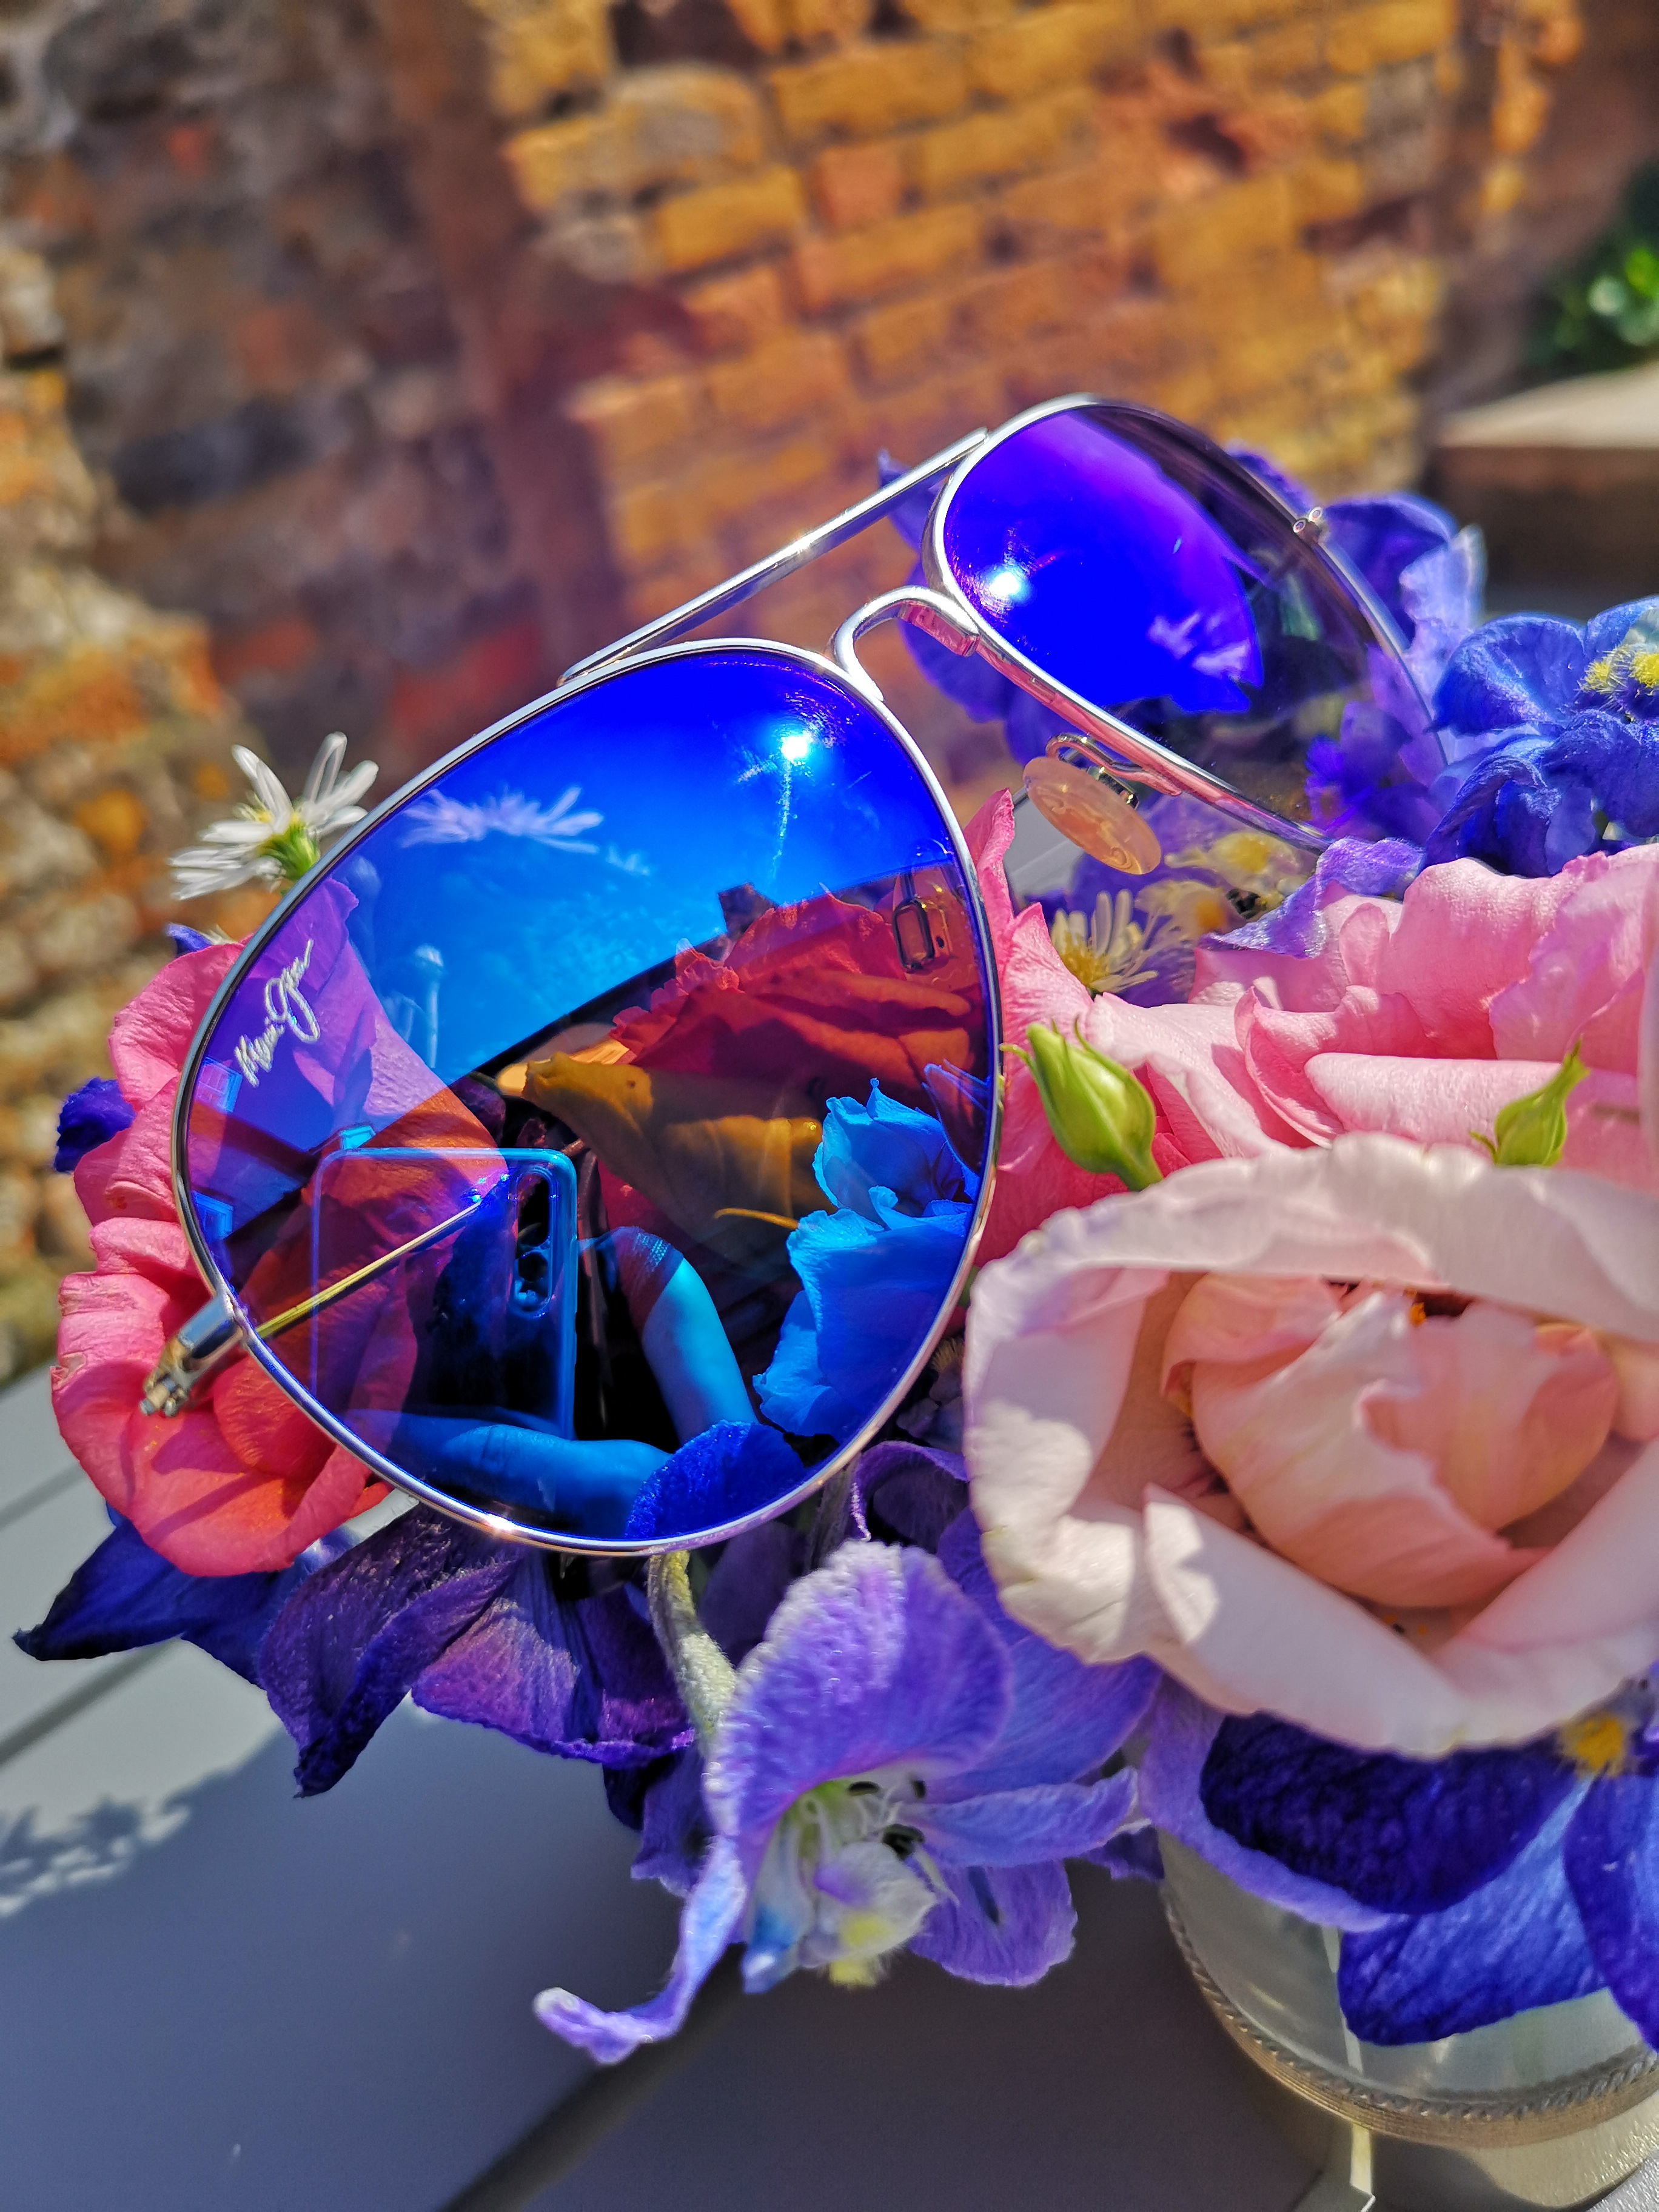 An exclusive opportunity to view the complete Maui Jim range